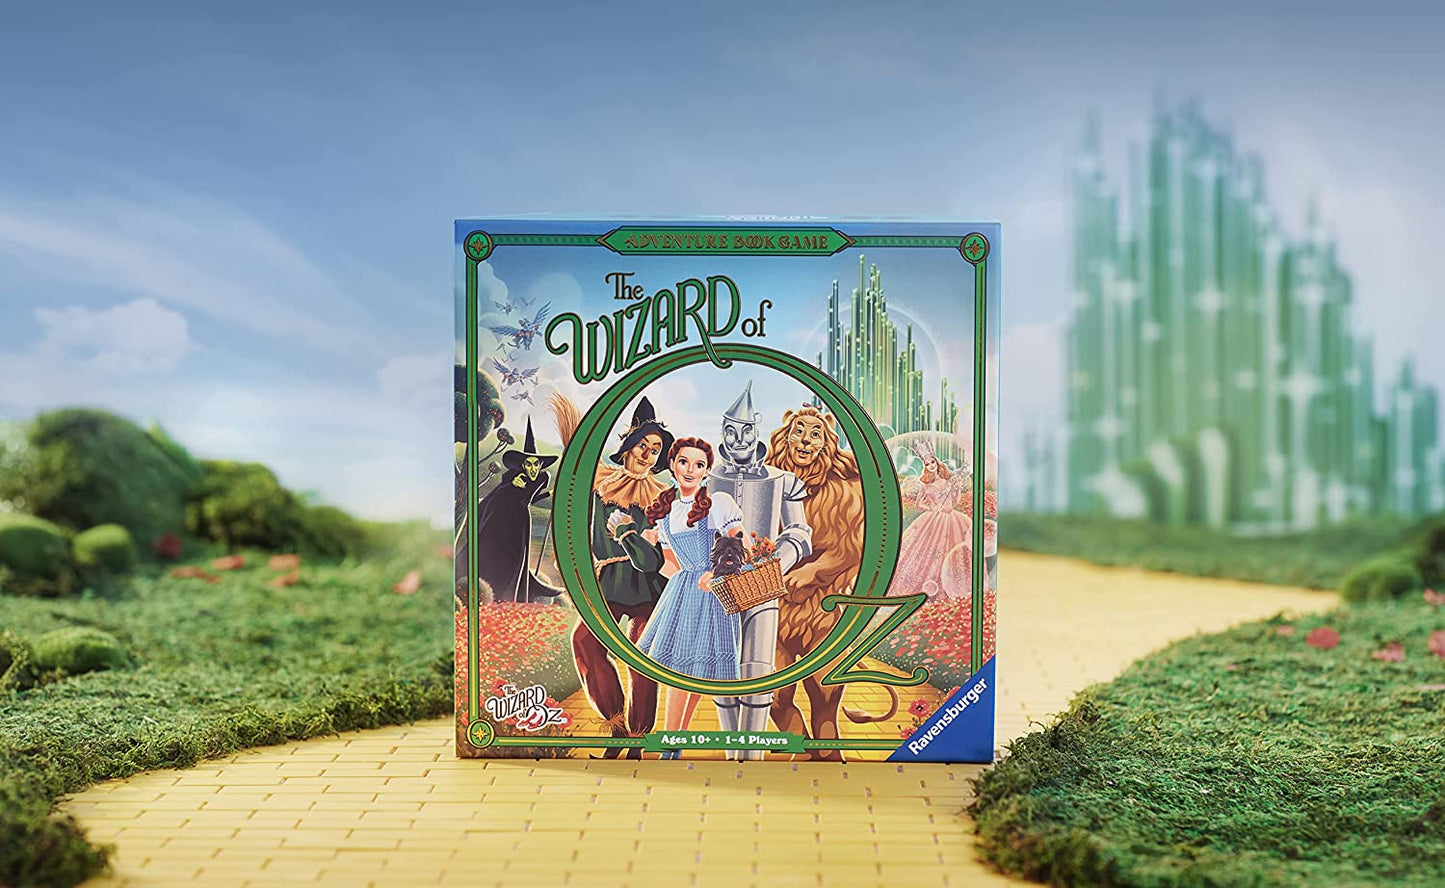 The Wizard of Oz Adventure Book Game